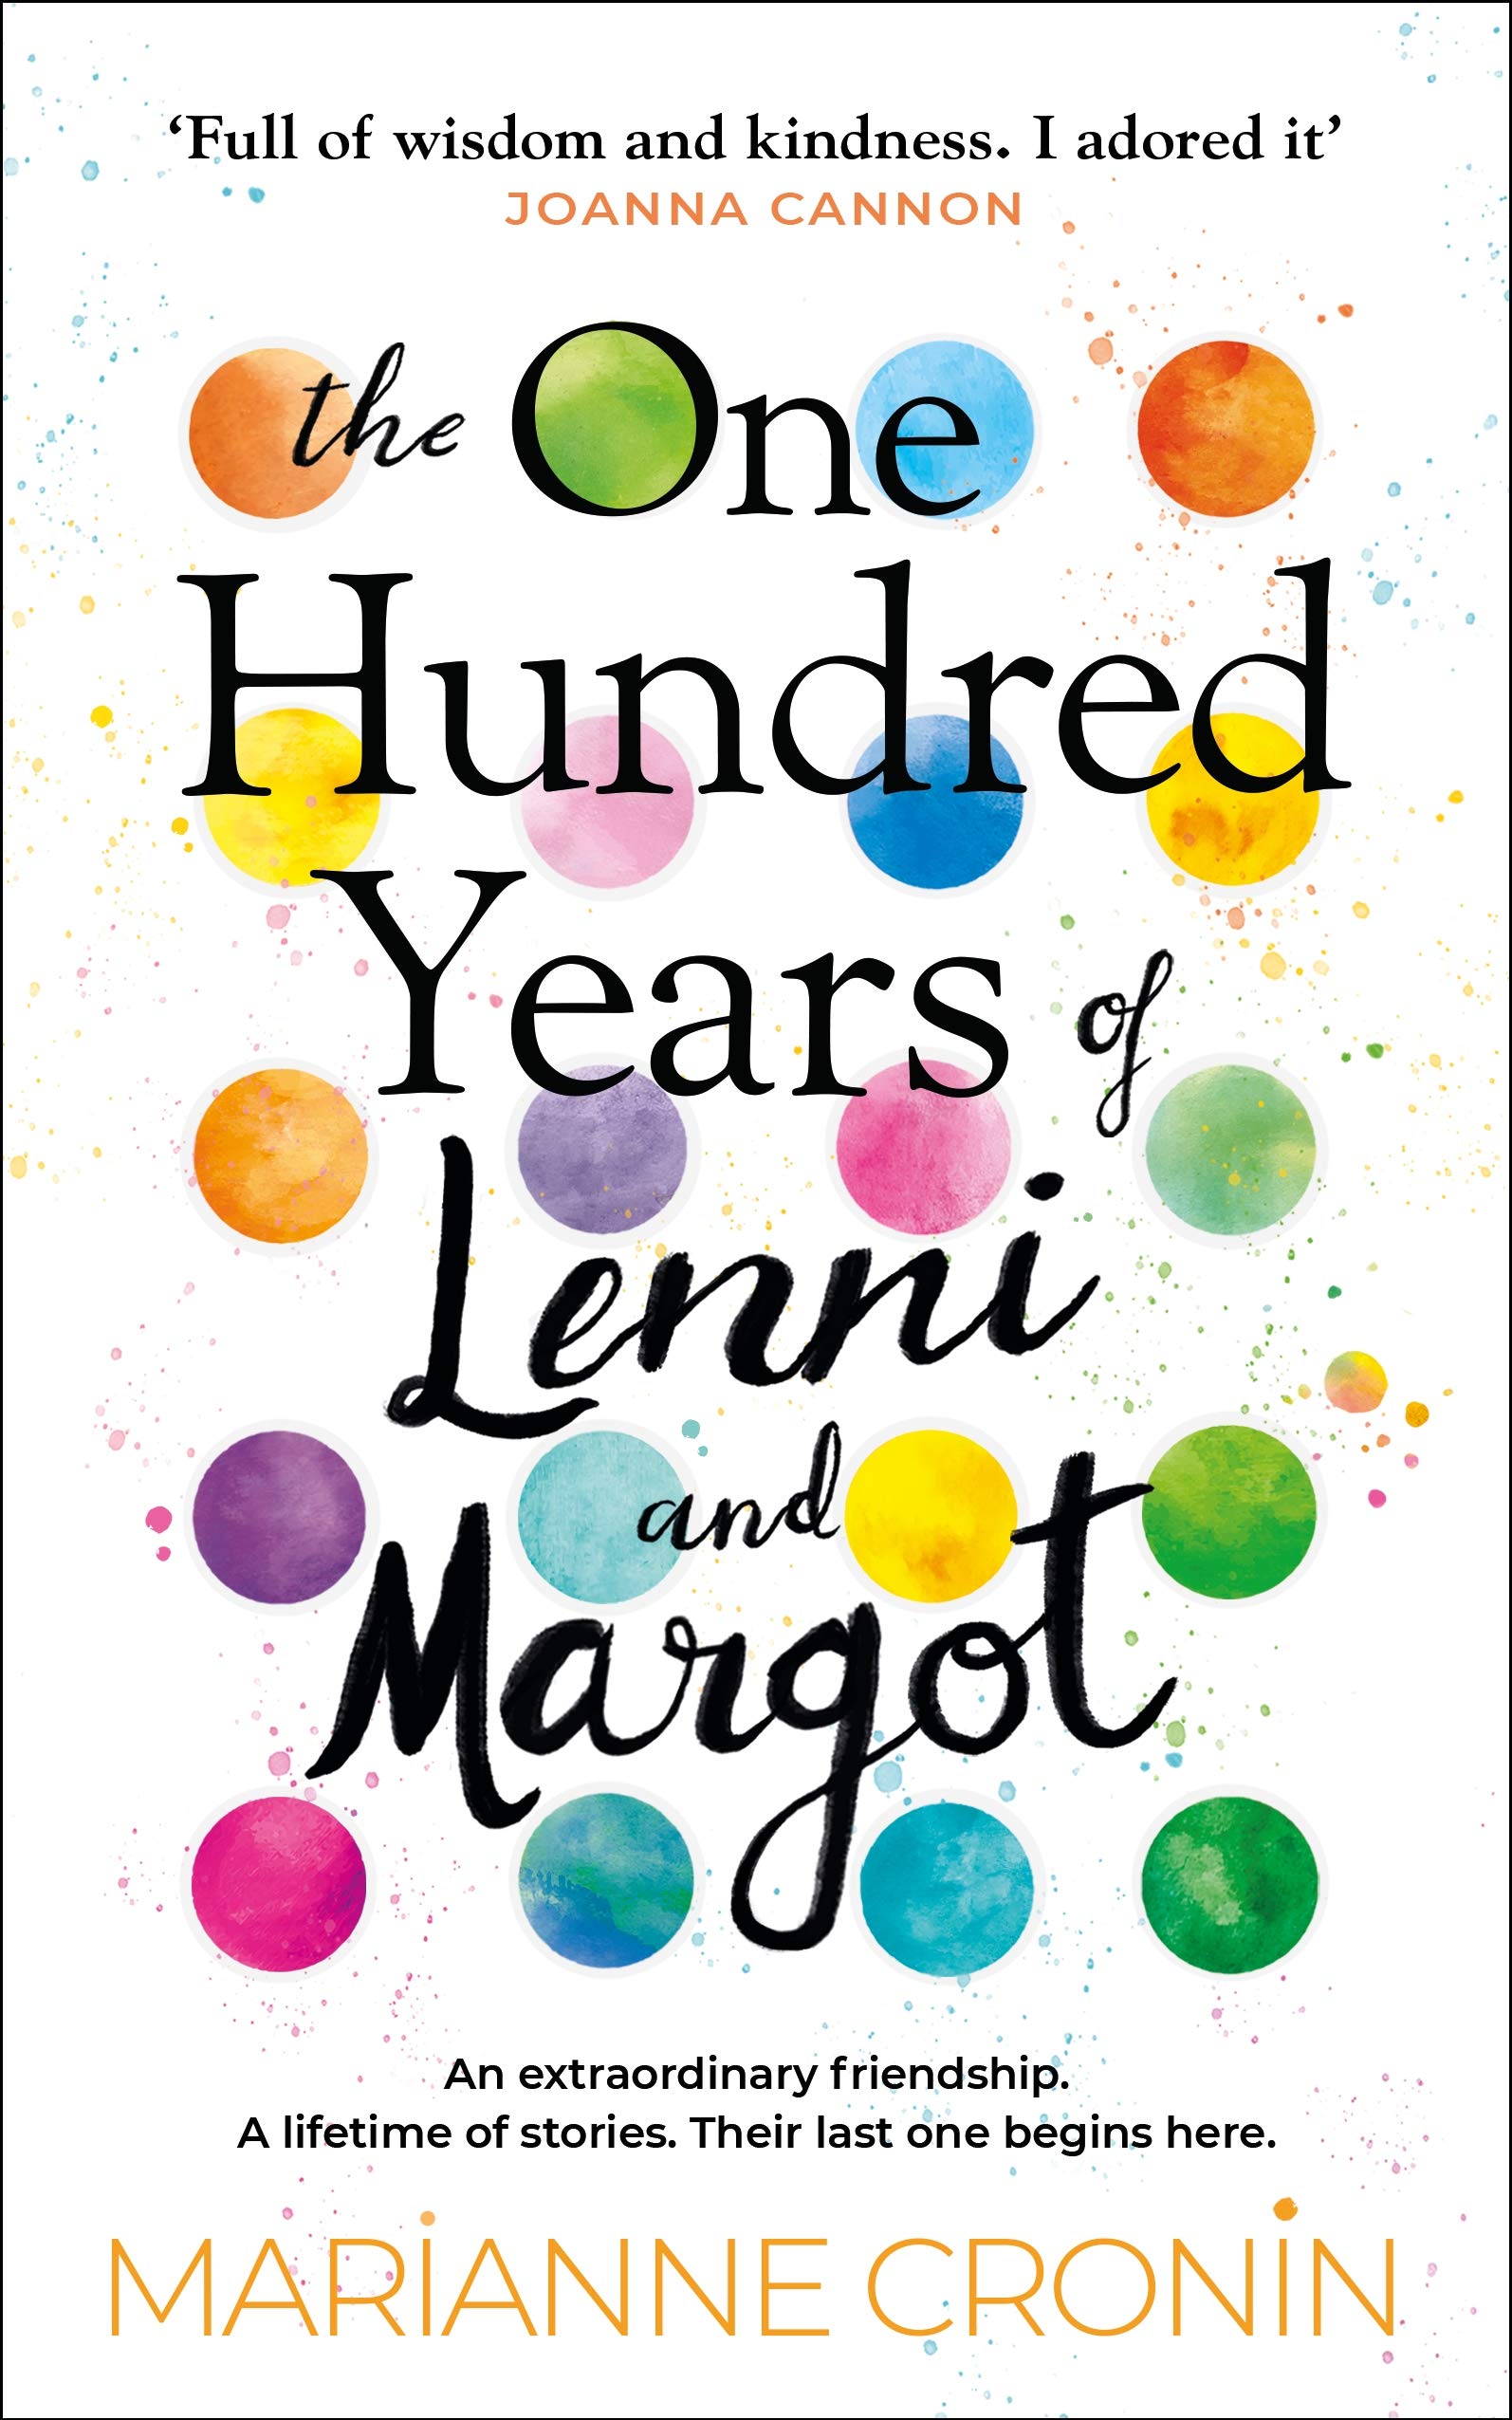 The One Hundred Years of Lenni and Margot | Marianne Cronin